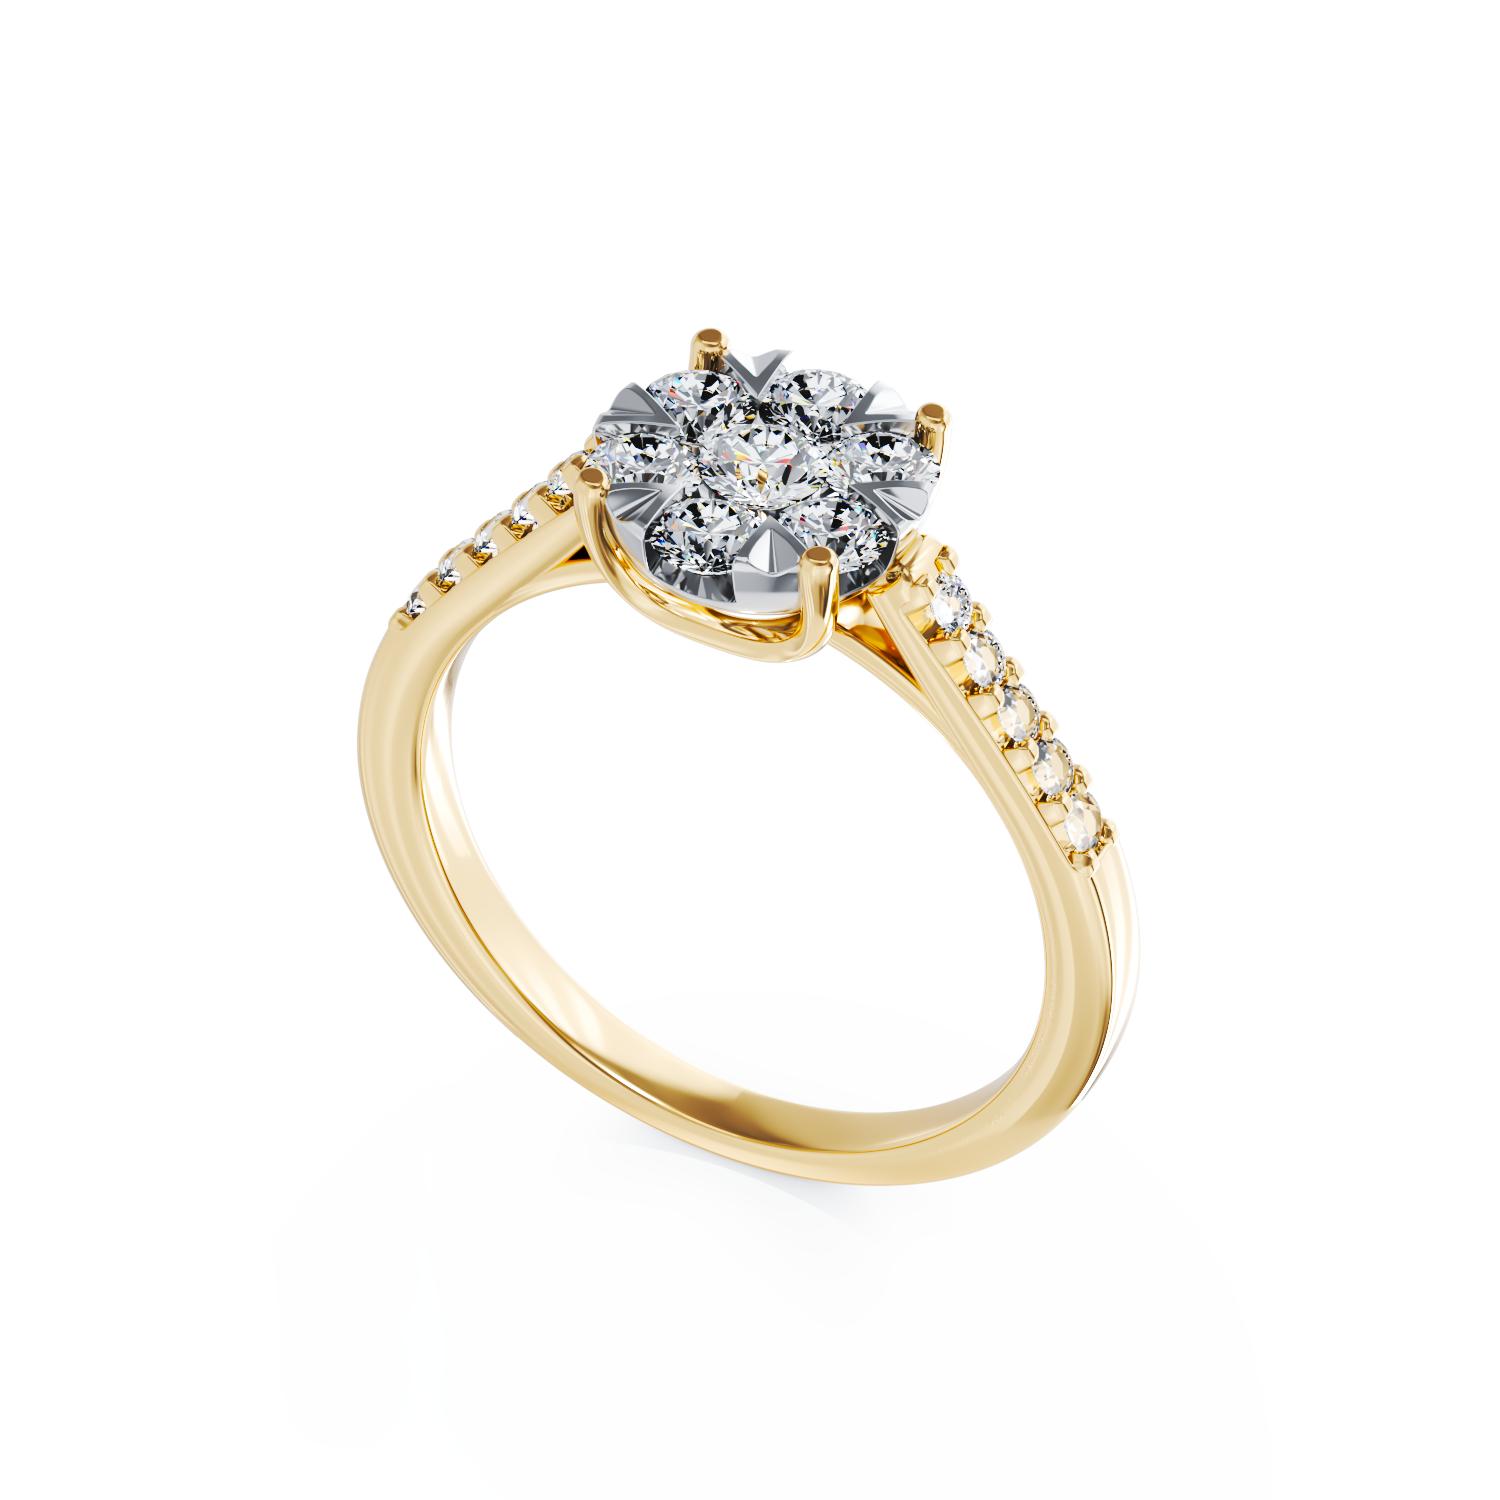 Yellow gold engagement ring with 0.5ct diamonds